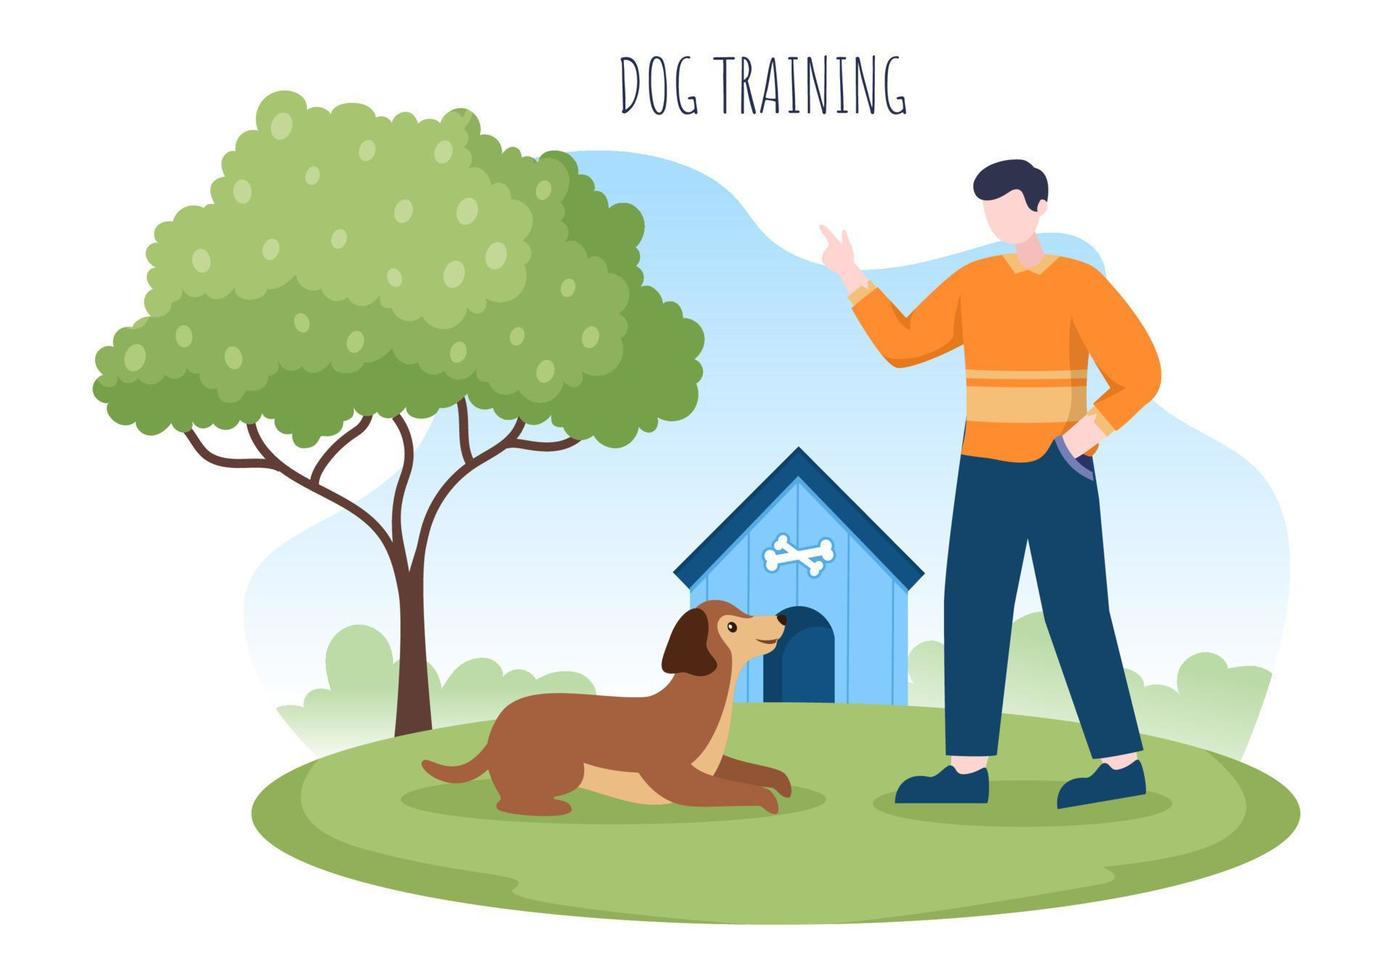 Dogs Training Center at Playground with Instructor Teaching Pets or Play for Tricks and Jumping Skills in Flat Cartoon Background Illustration vector